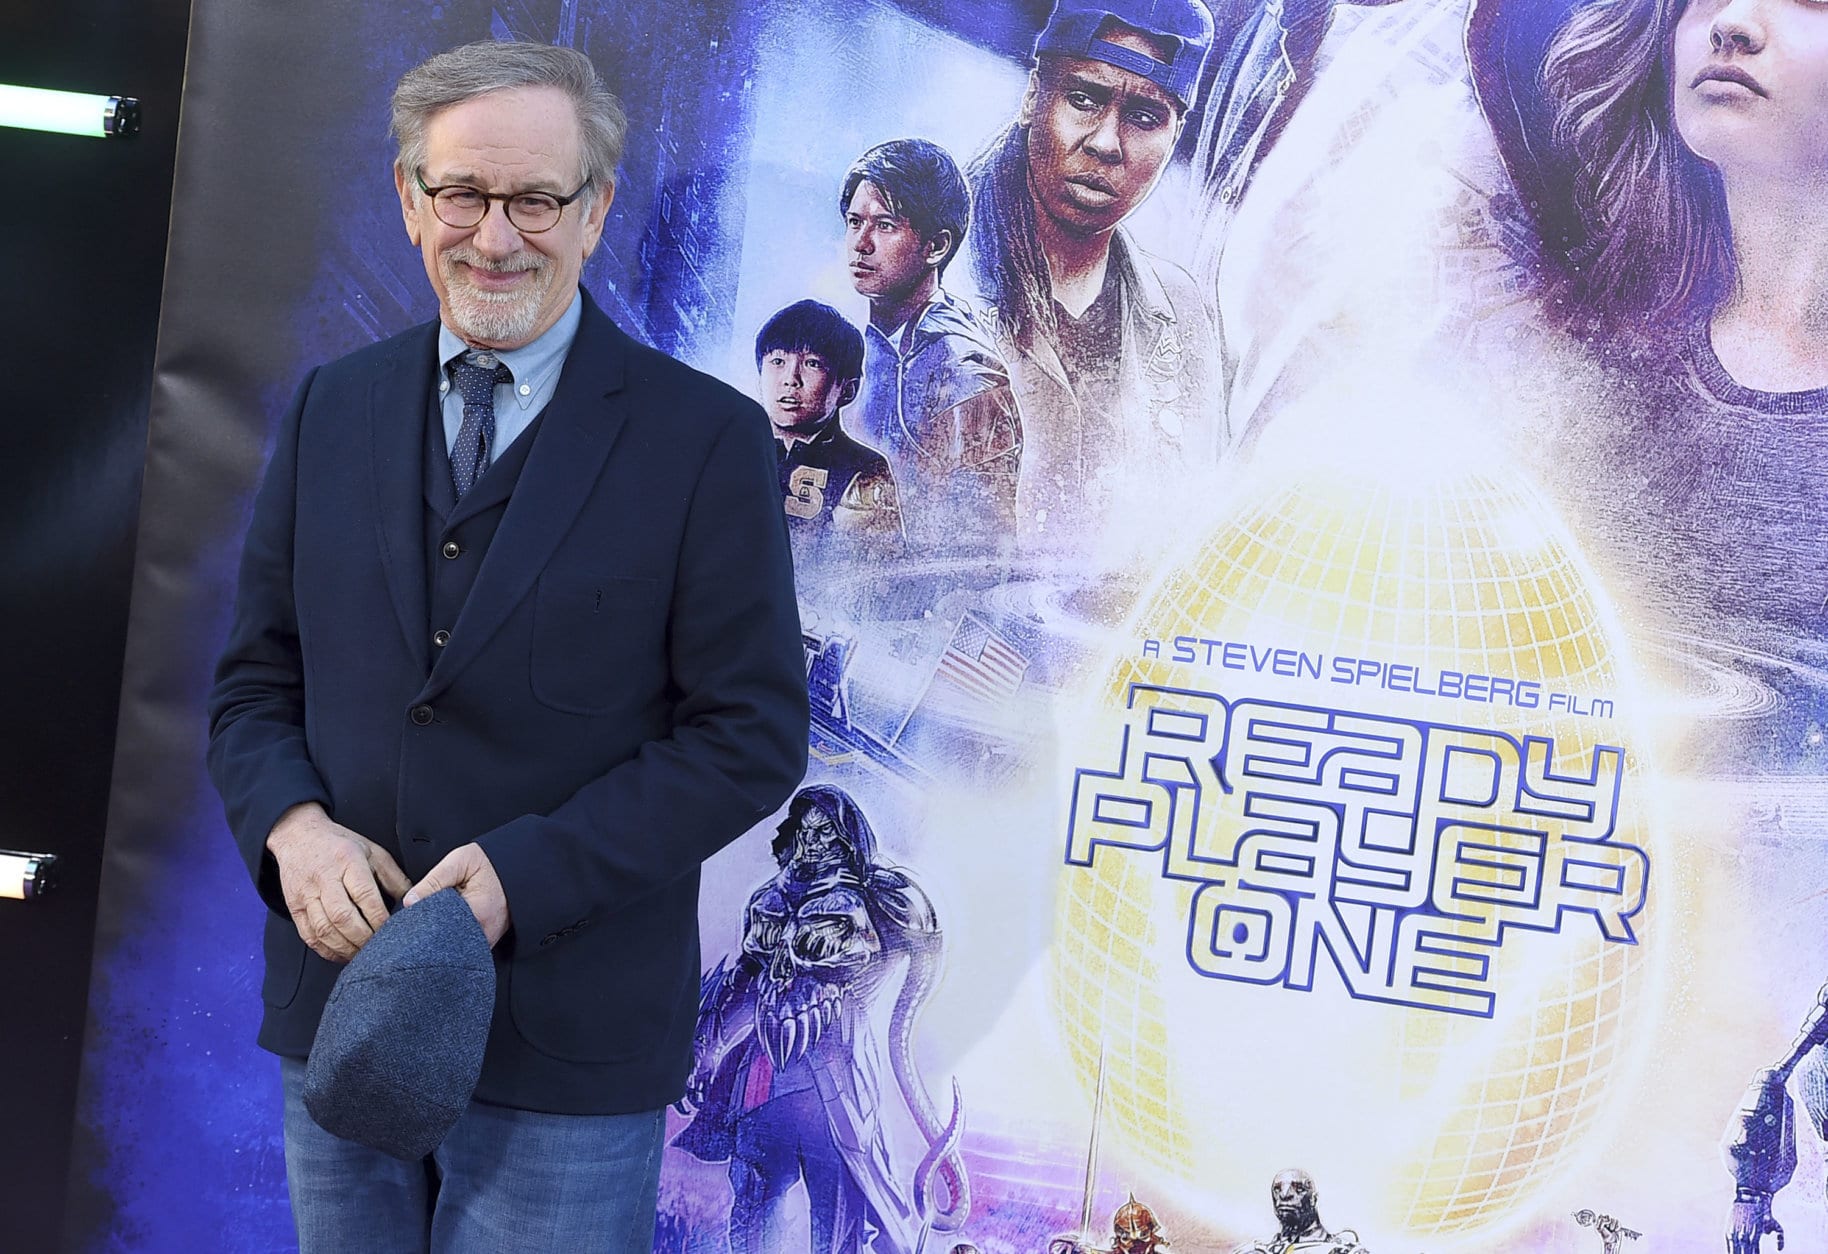 Steven Spielberg arrives at the world premiere of "Ready Player One" at the Dolby Theatre on Monday, March 26, 2018, in Los Angeles. (Photo by Jordan Strauss/Invision/AP)